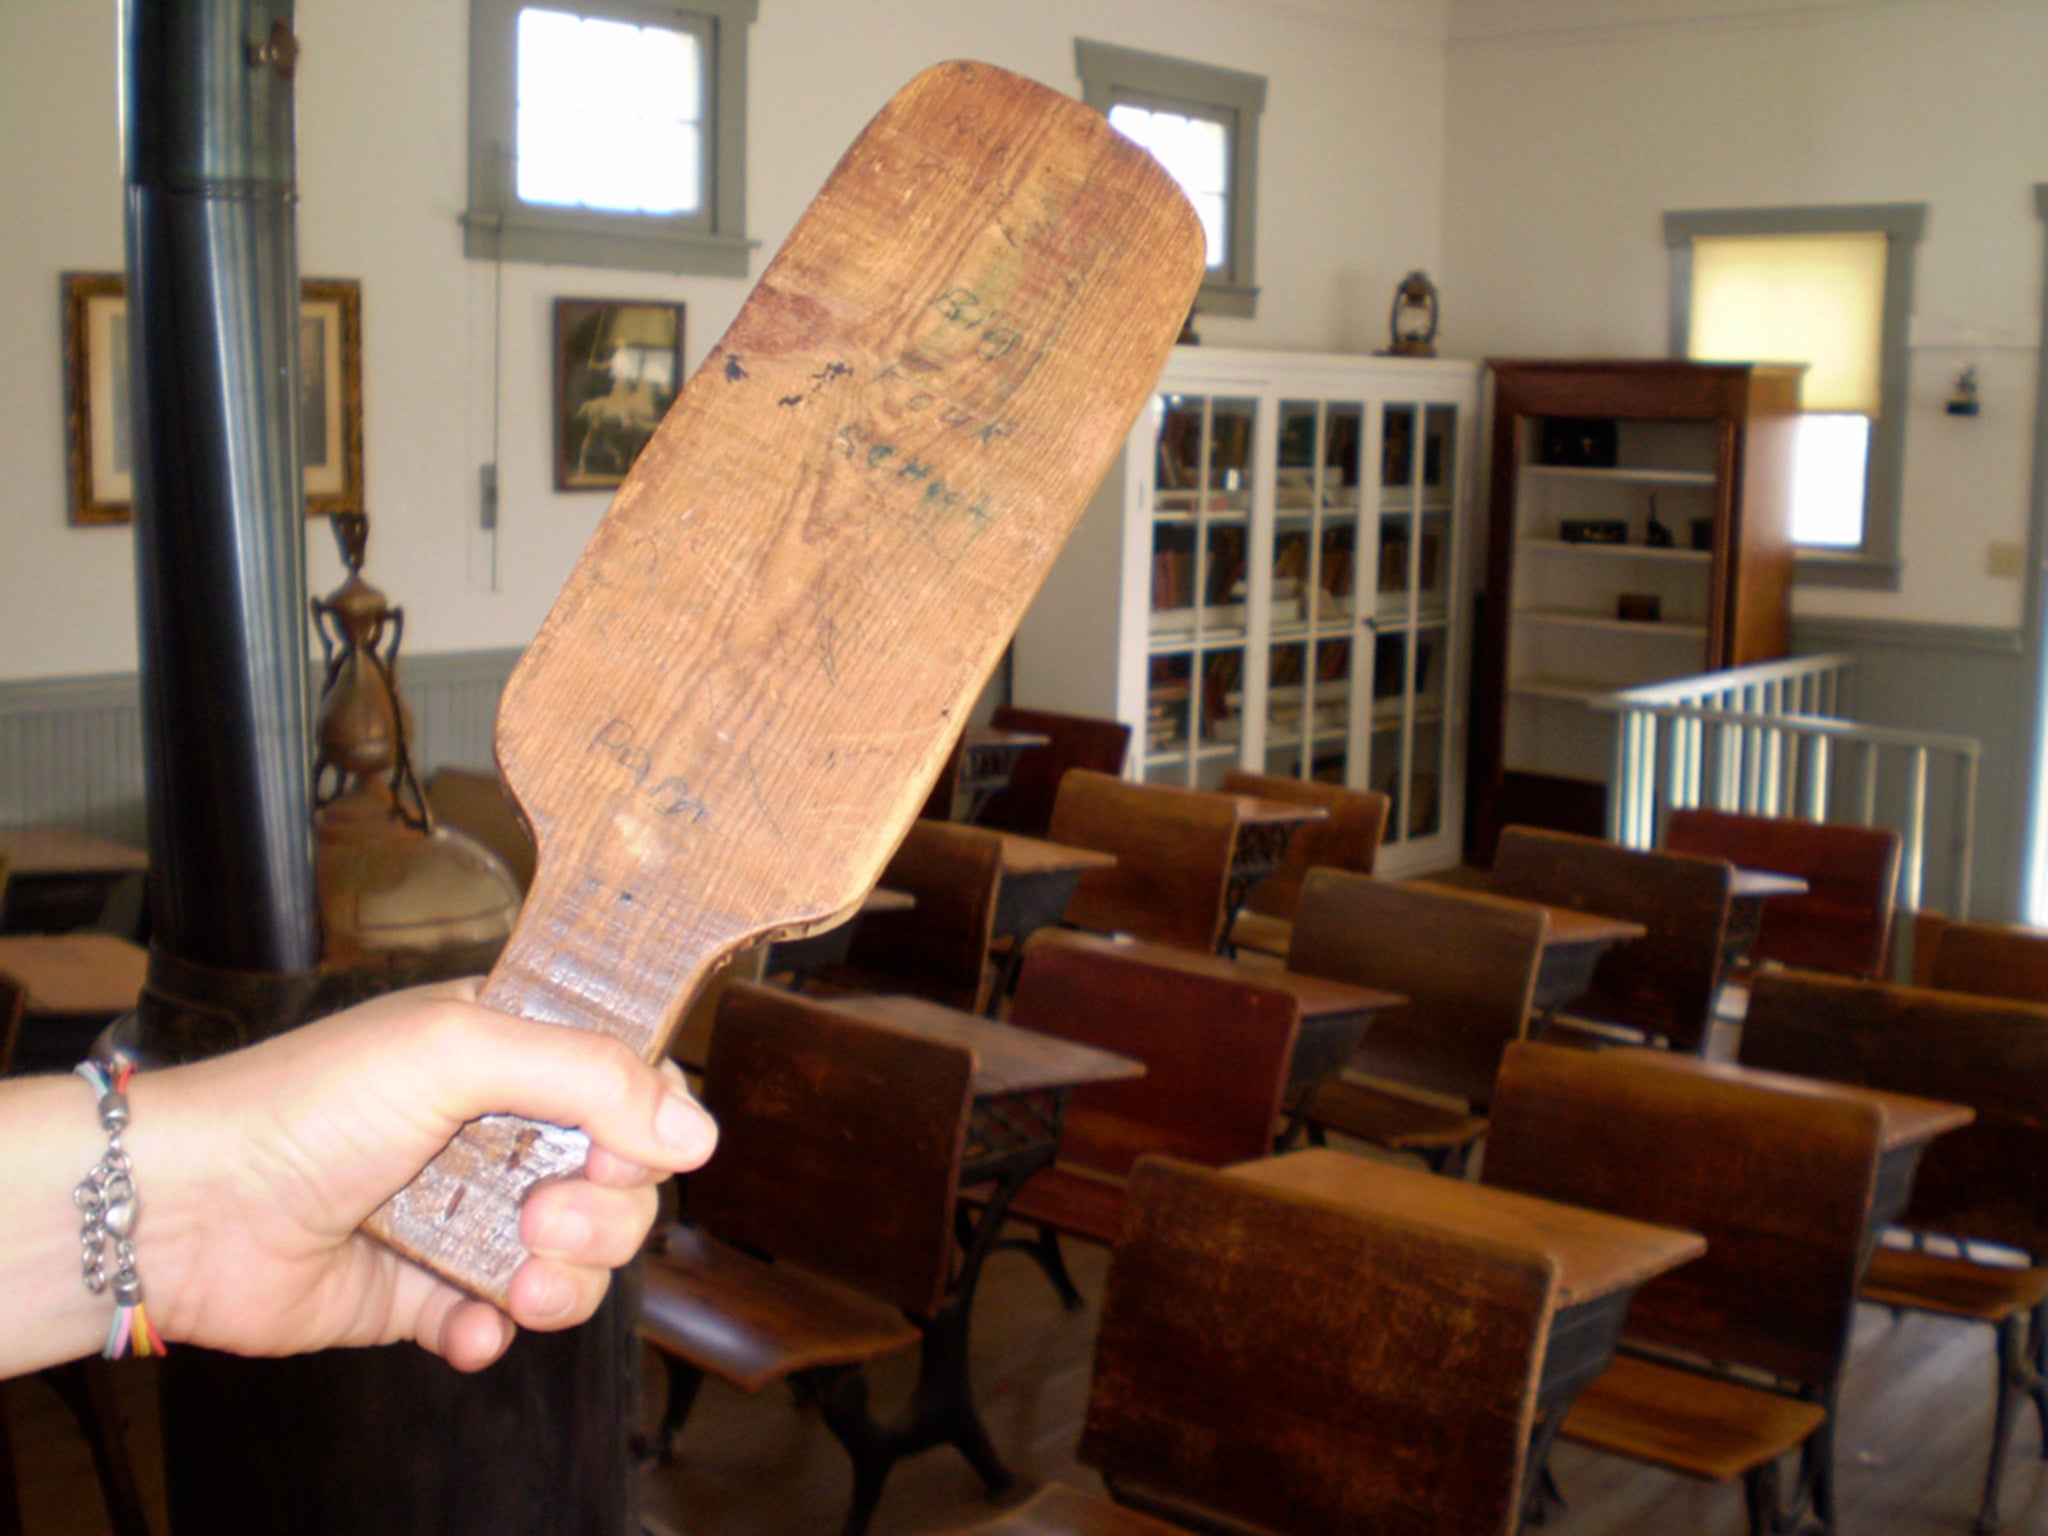 Bad Student Punished - Texas schools bring back corporal punishment for bad ...